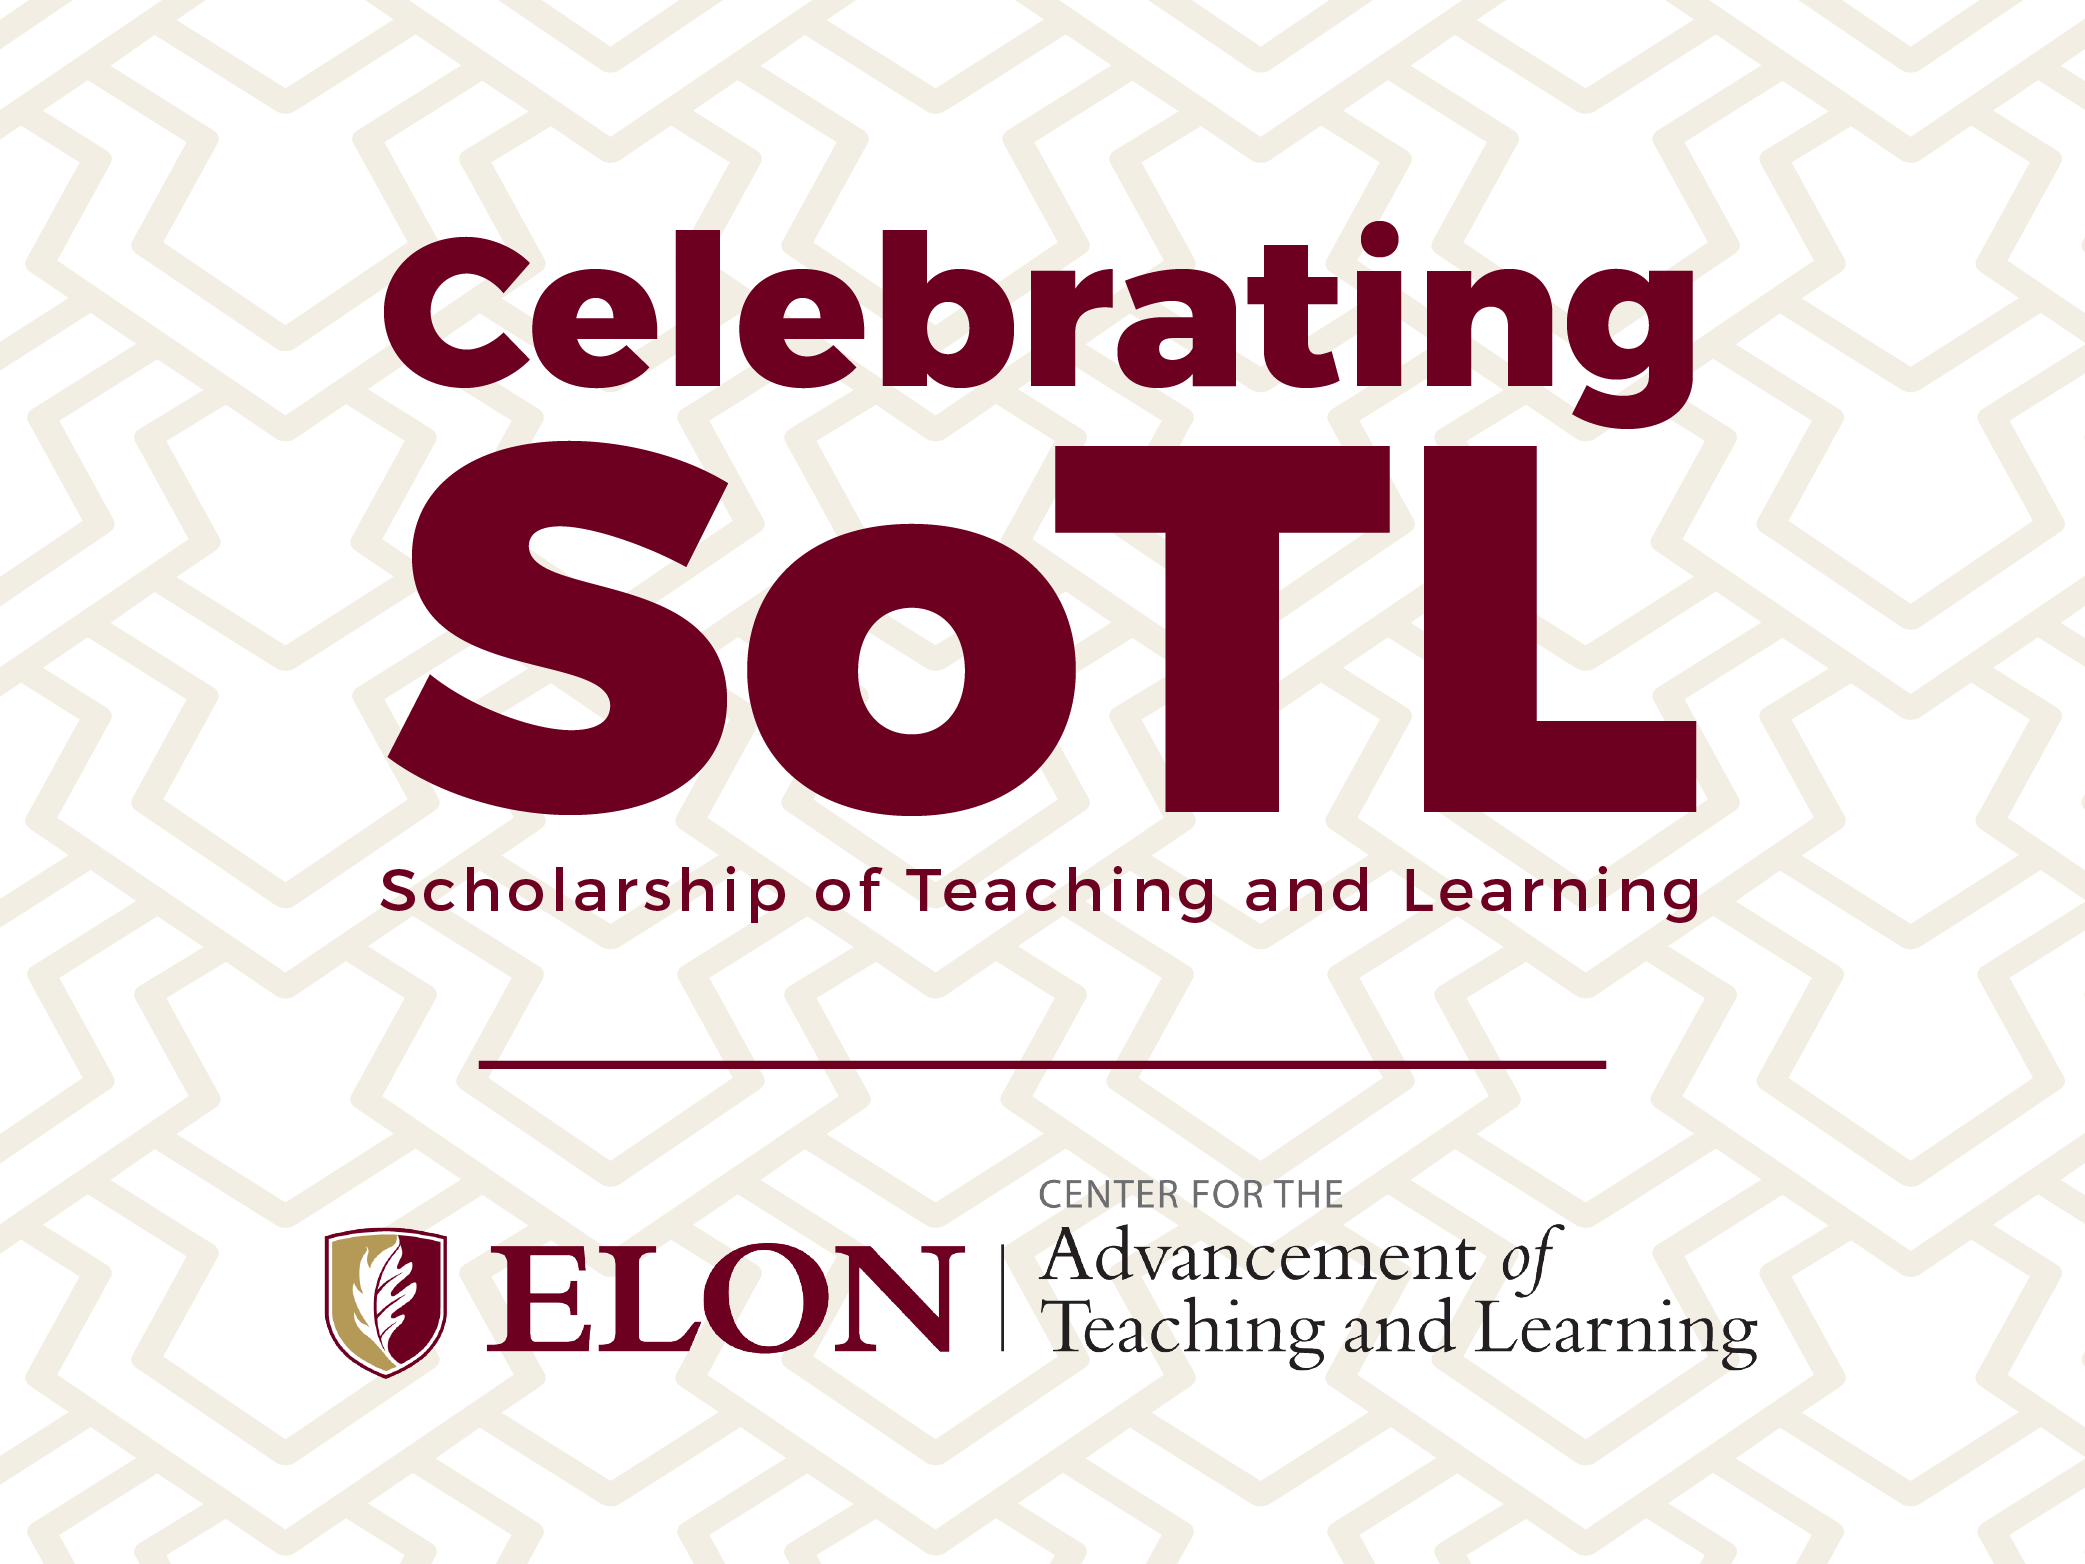 Celebrating SoTL - Scholarship of Teaching and Learning - Center for the Advancement of Teaching and Learning